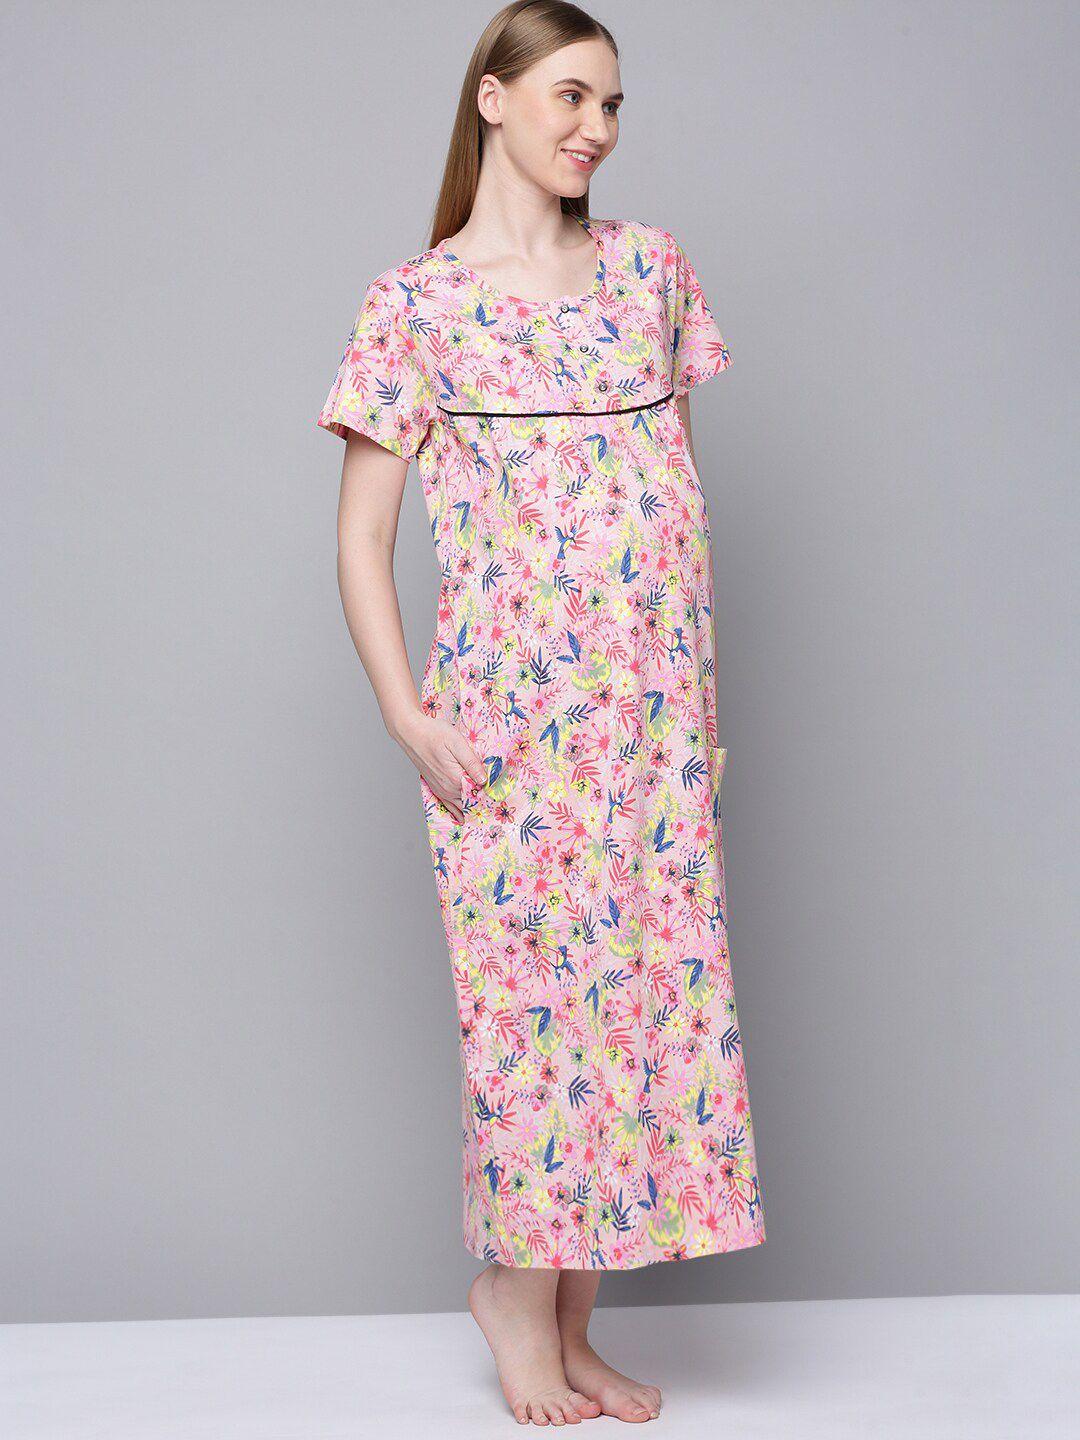 kryptic-floral-printed-pure-cotton-maternity-maxi-nightdress